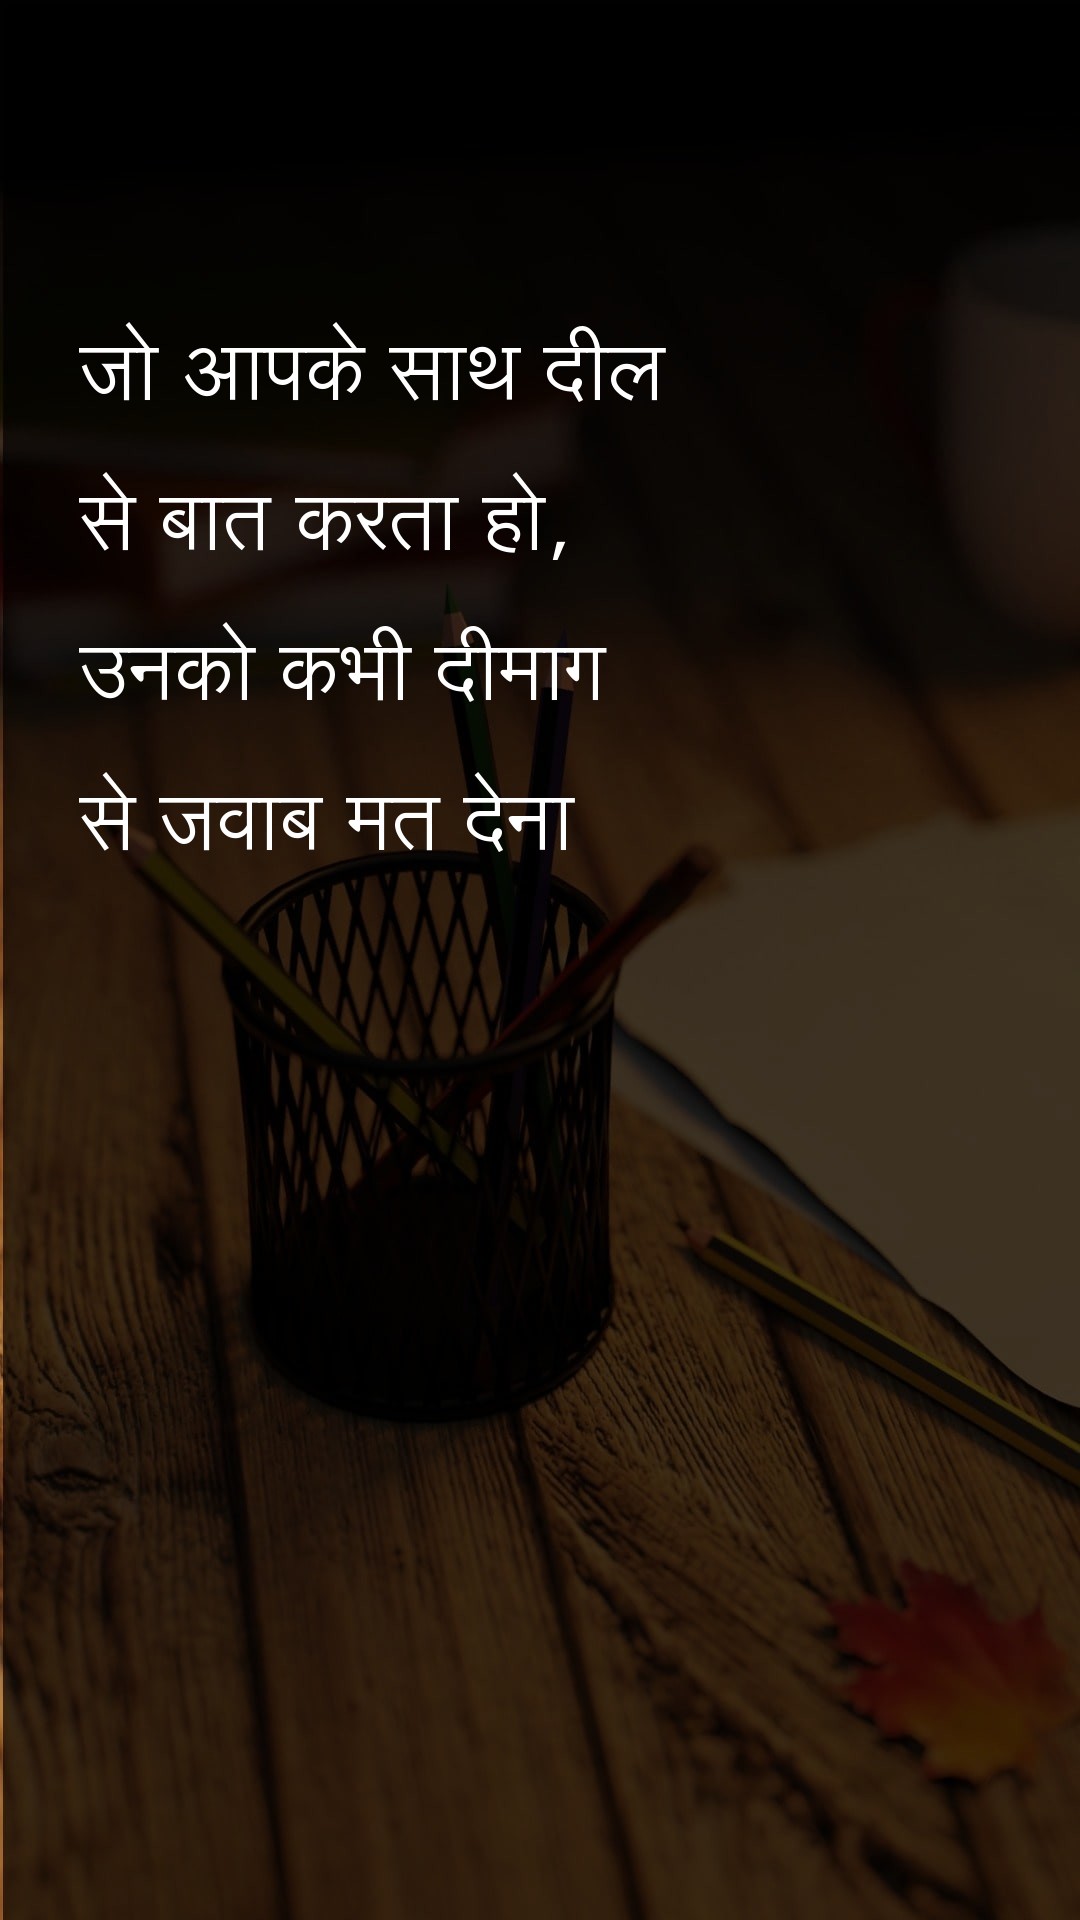 Never mind those who speak with you heartily - Hindi Quotes at statush.com